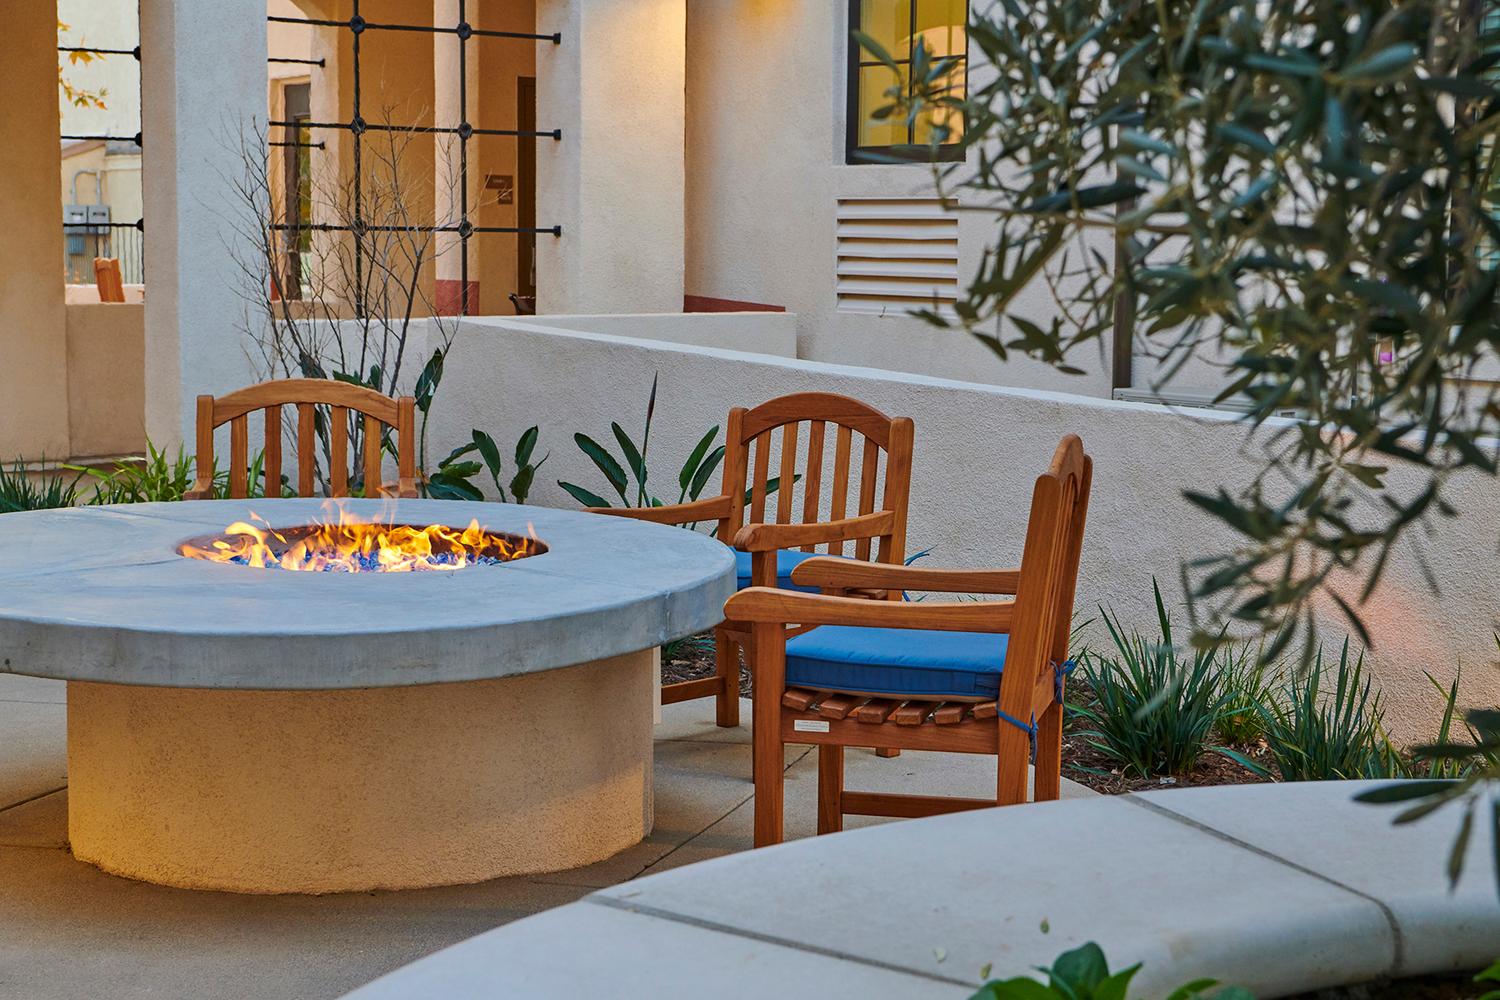 a fire pit with chairs around it on a patio.